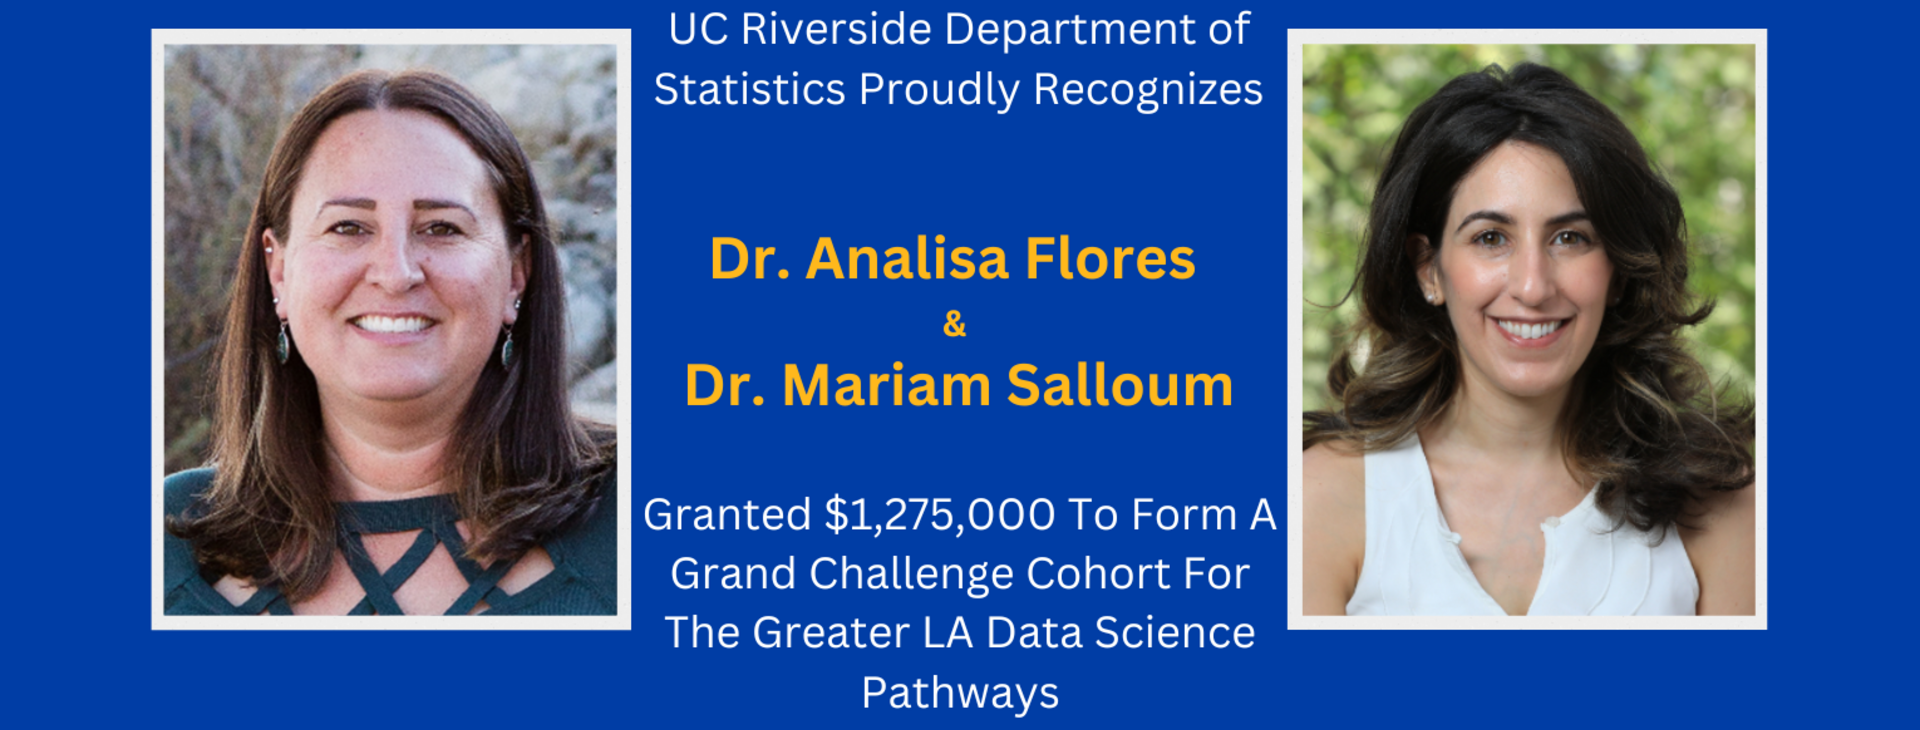 analisa flores and mariam salloum granted over a million to from a grand challenge cohort for the greater la data science pathways